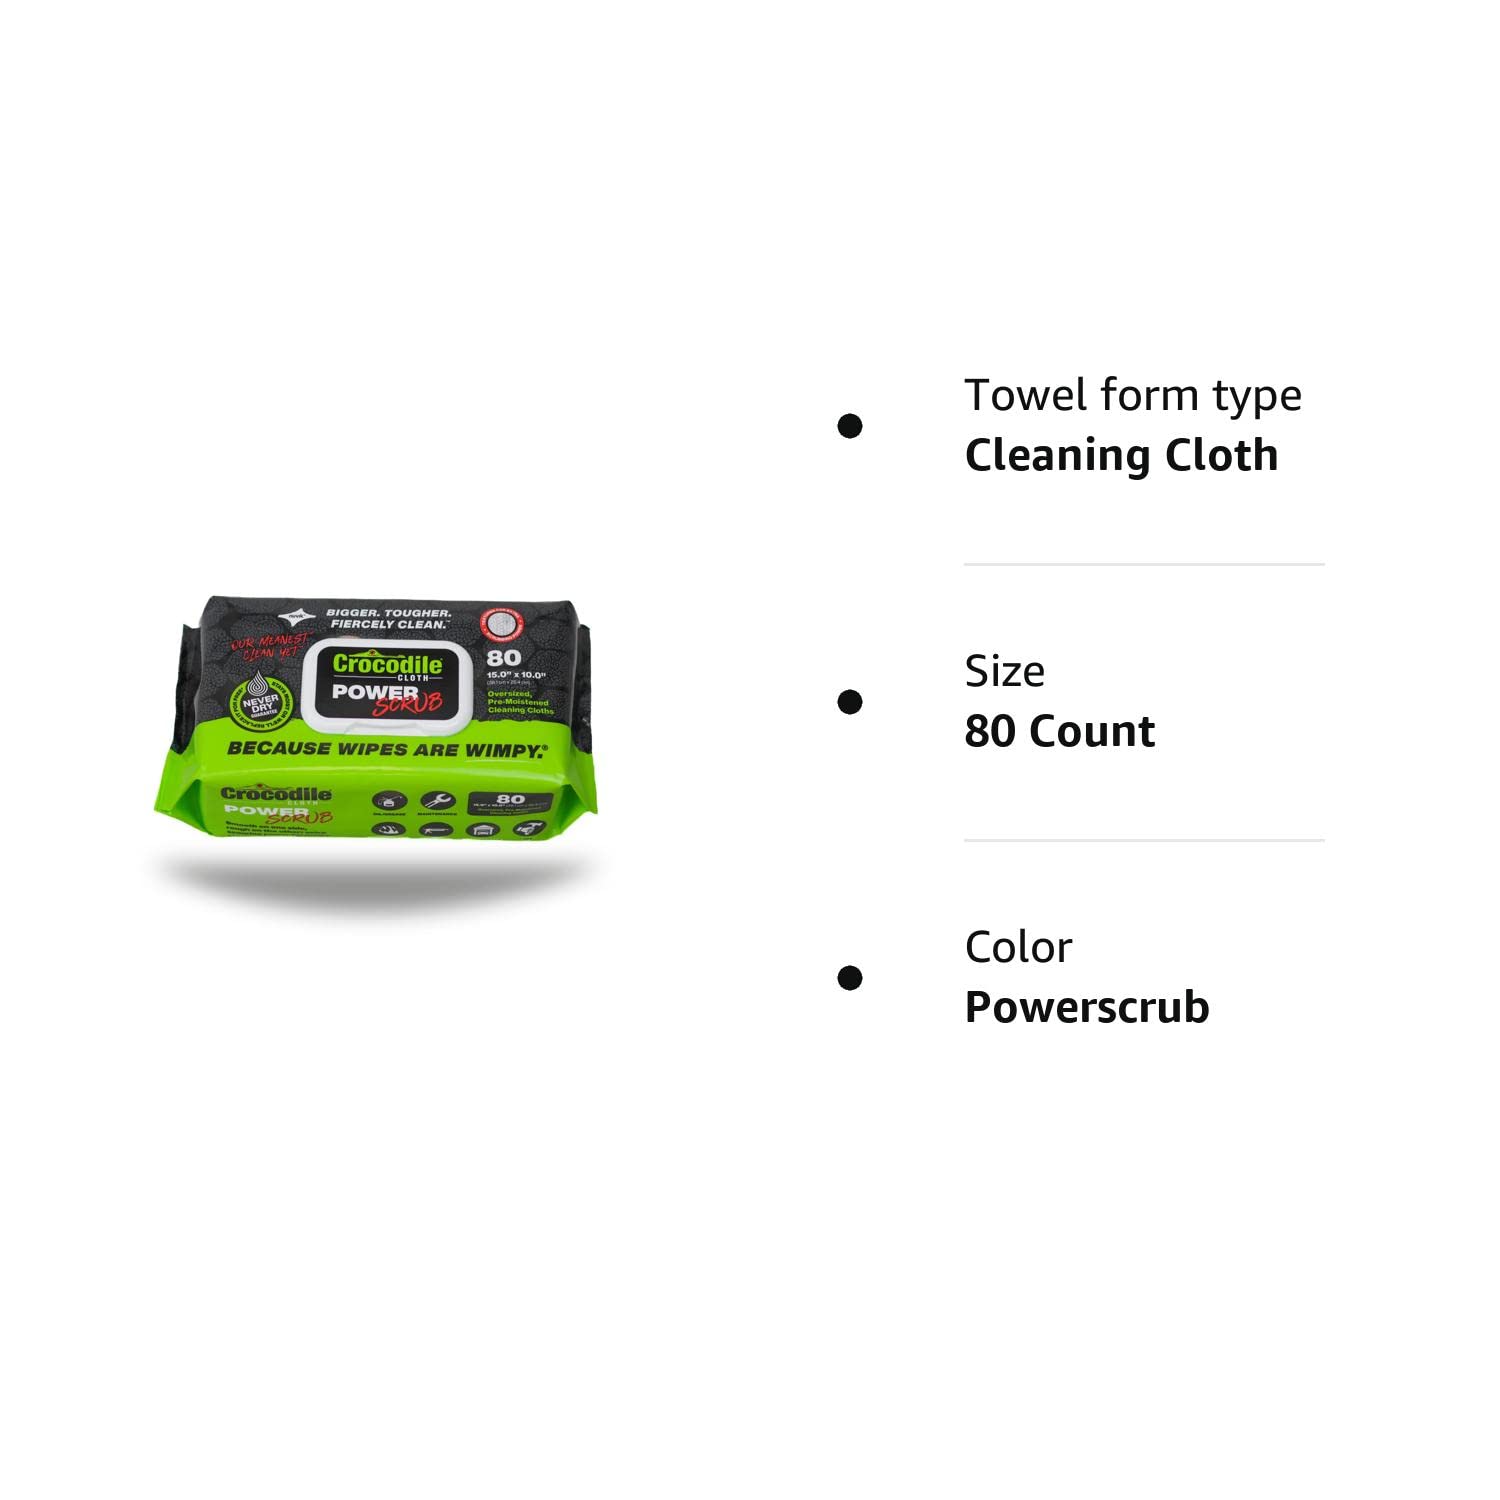 PowerScrub by Crocodile Cloth - 80 Textured Cloths, 10in X 15in. Large, Moist, Absorbent & Disposable Cleaning Cloths. Safe on Skin and Multiple Surfaces - Tools, Wood, Plastic, Metals